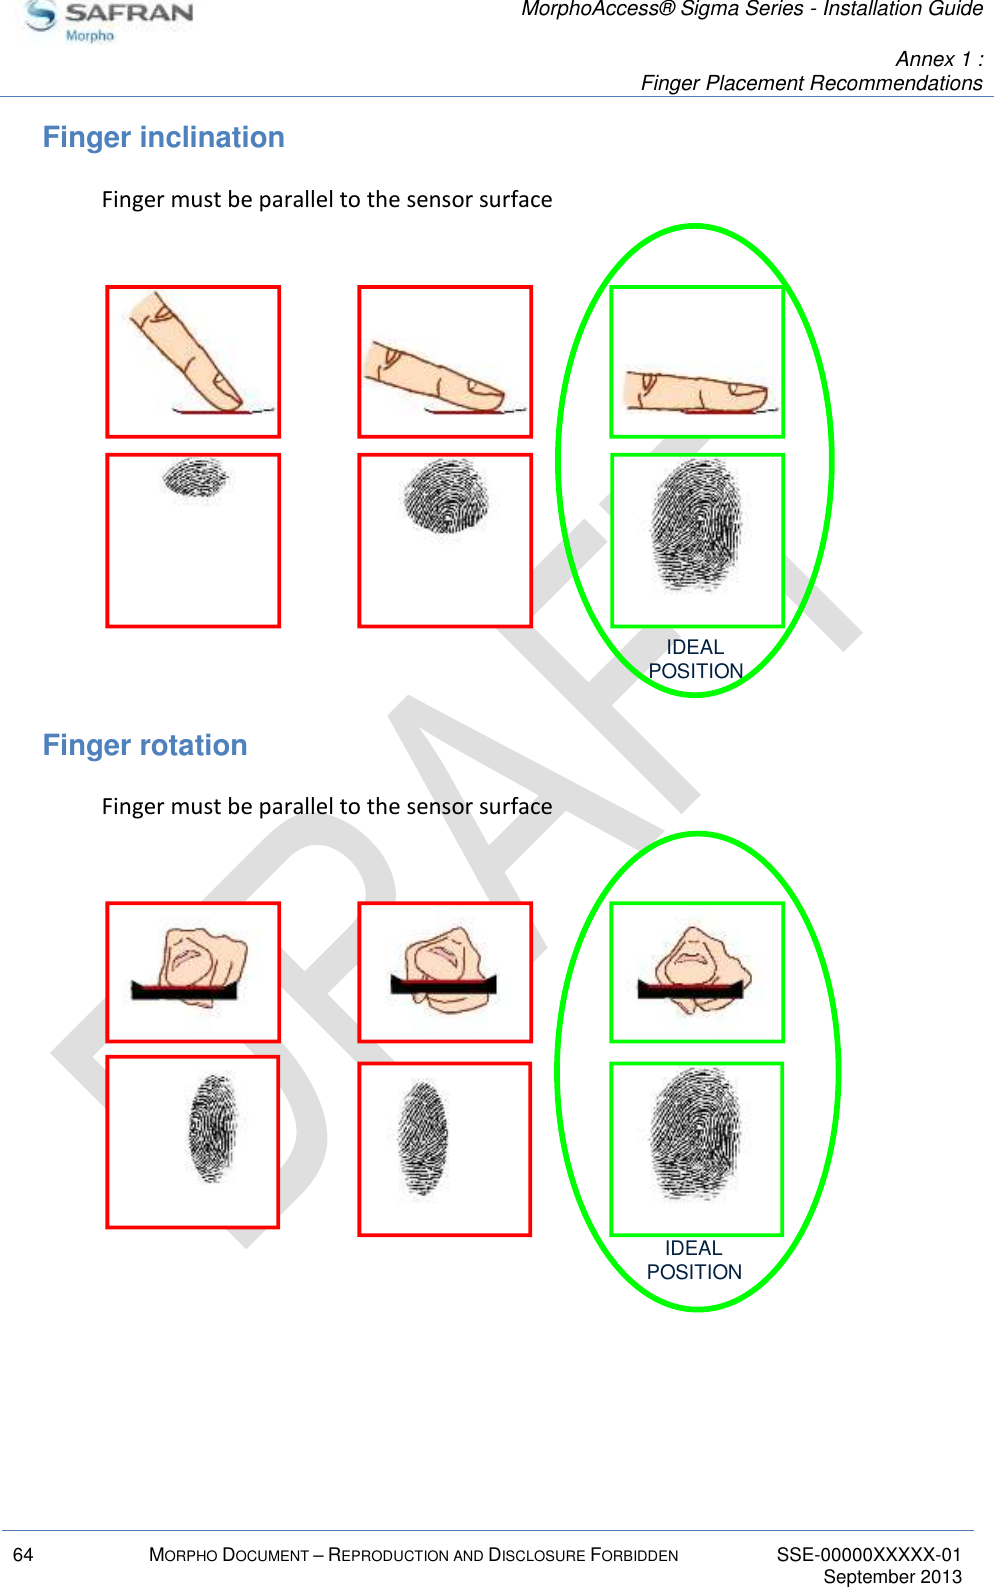   MorphoAccess® Sigma Series - Installation Guide   Annex 1 :  Finger Placement Recommendations  64 MORPHO DOCUMENT – REPRODUCTION AND DISCLOSURE FORBIDDEN SSE-00000XXXXX-01   September 2013  Finger inclination Finger must be parallel to the sensor surface  Finger rotation Finger must be parallel to the sensor surface   IDEALPOSITIONIDEALPOSITION